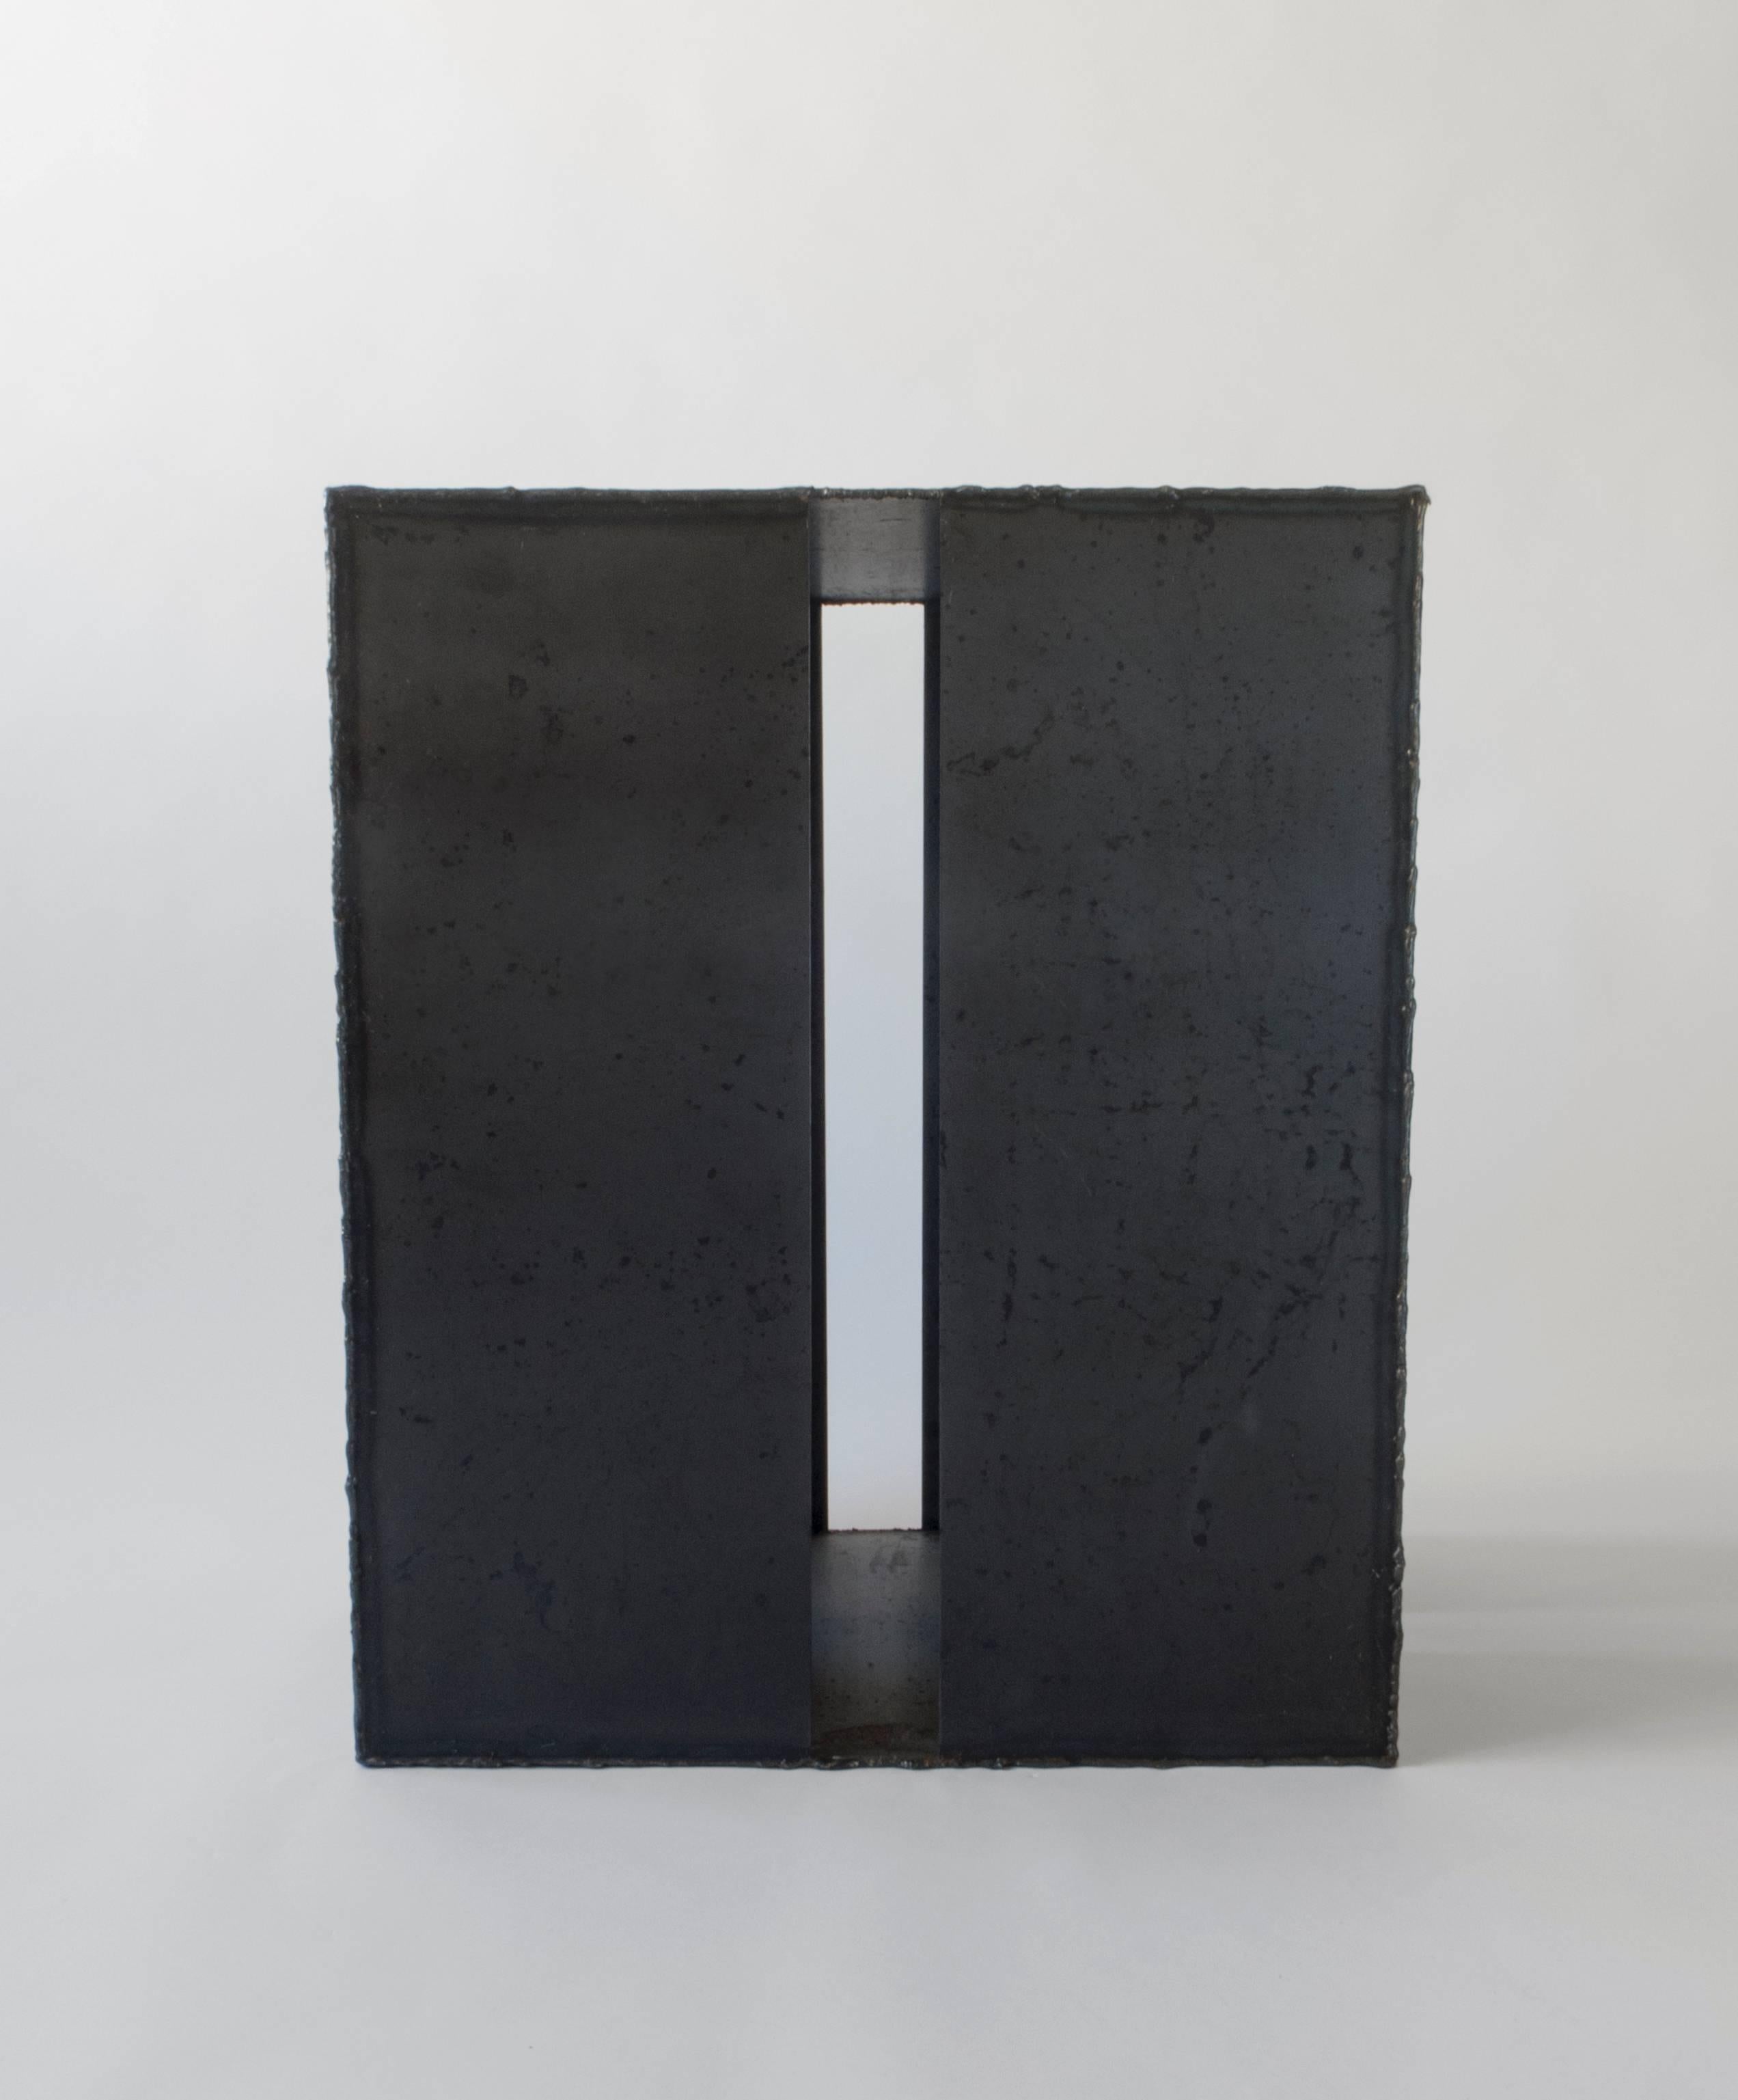 A sculptural and Minimalist design by former Maison Jansen interior designer Arthur B. Kouwenhoven Jr. 

A unique and captivating juxtaposition of bare material and elegant design. The rectangular top hand-etched in a free-form design, above a